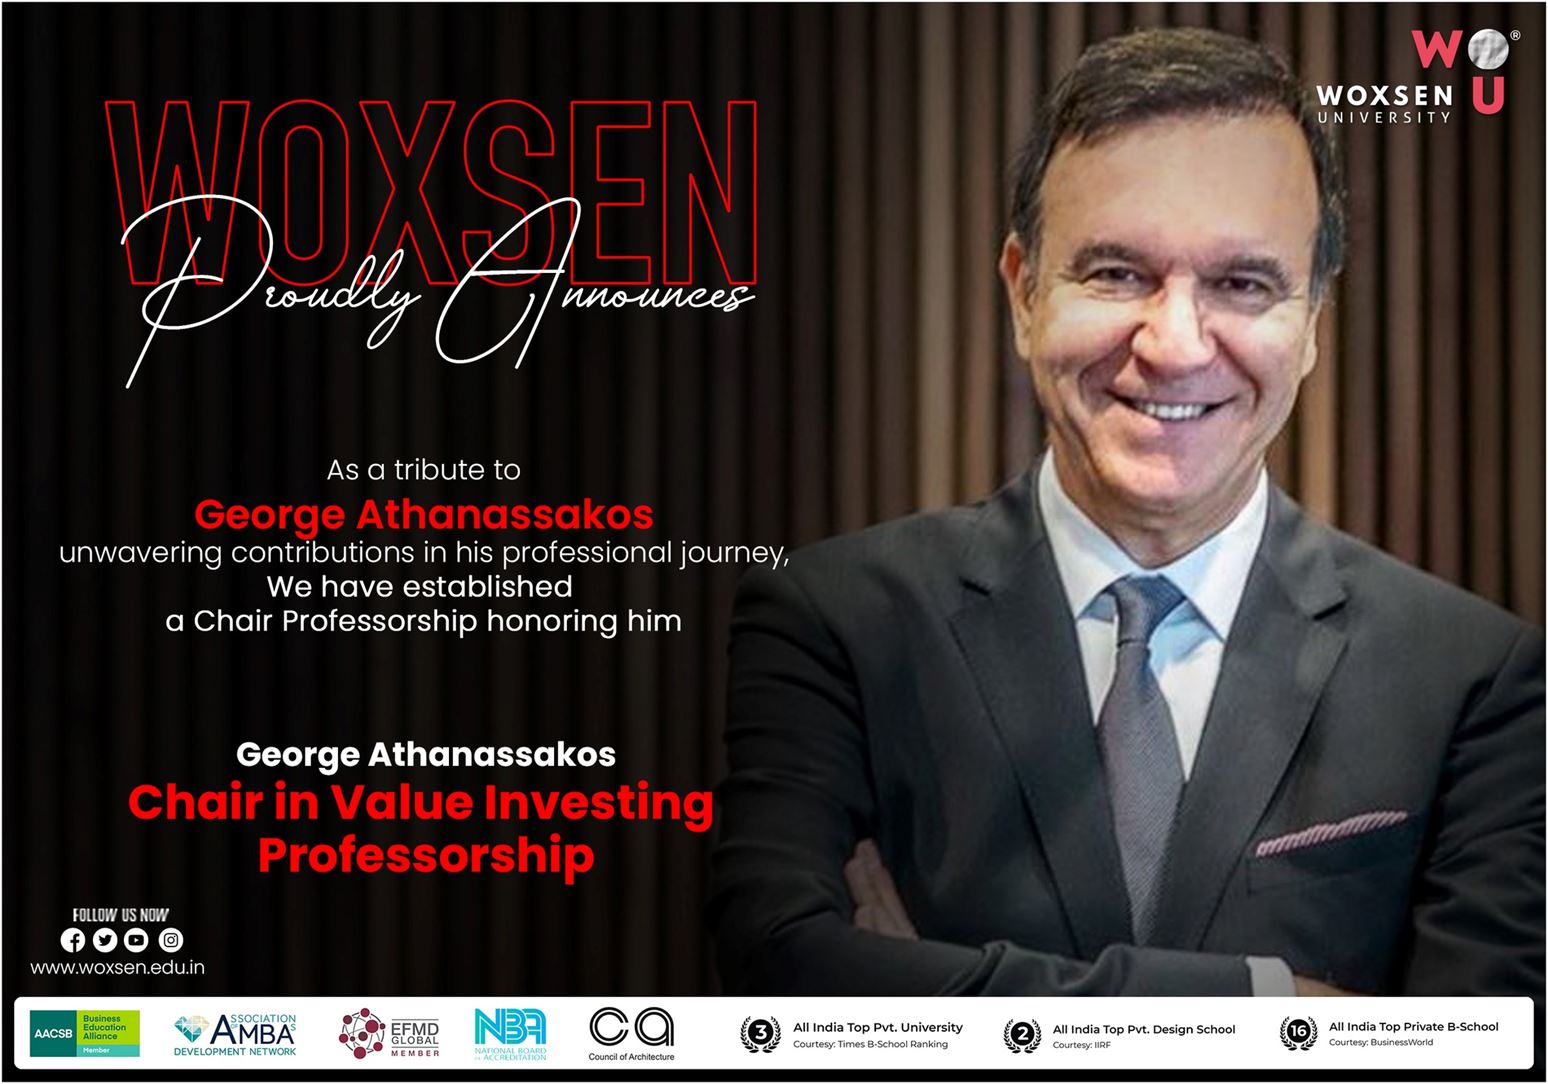 "The George Athanassakos Chair in Value Investing" at Woxsen University